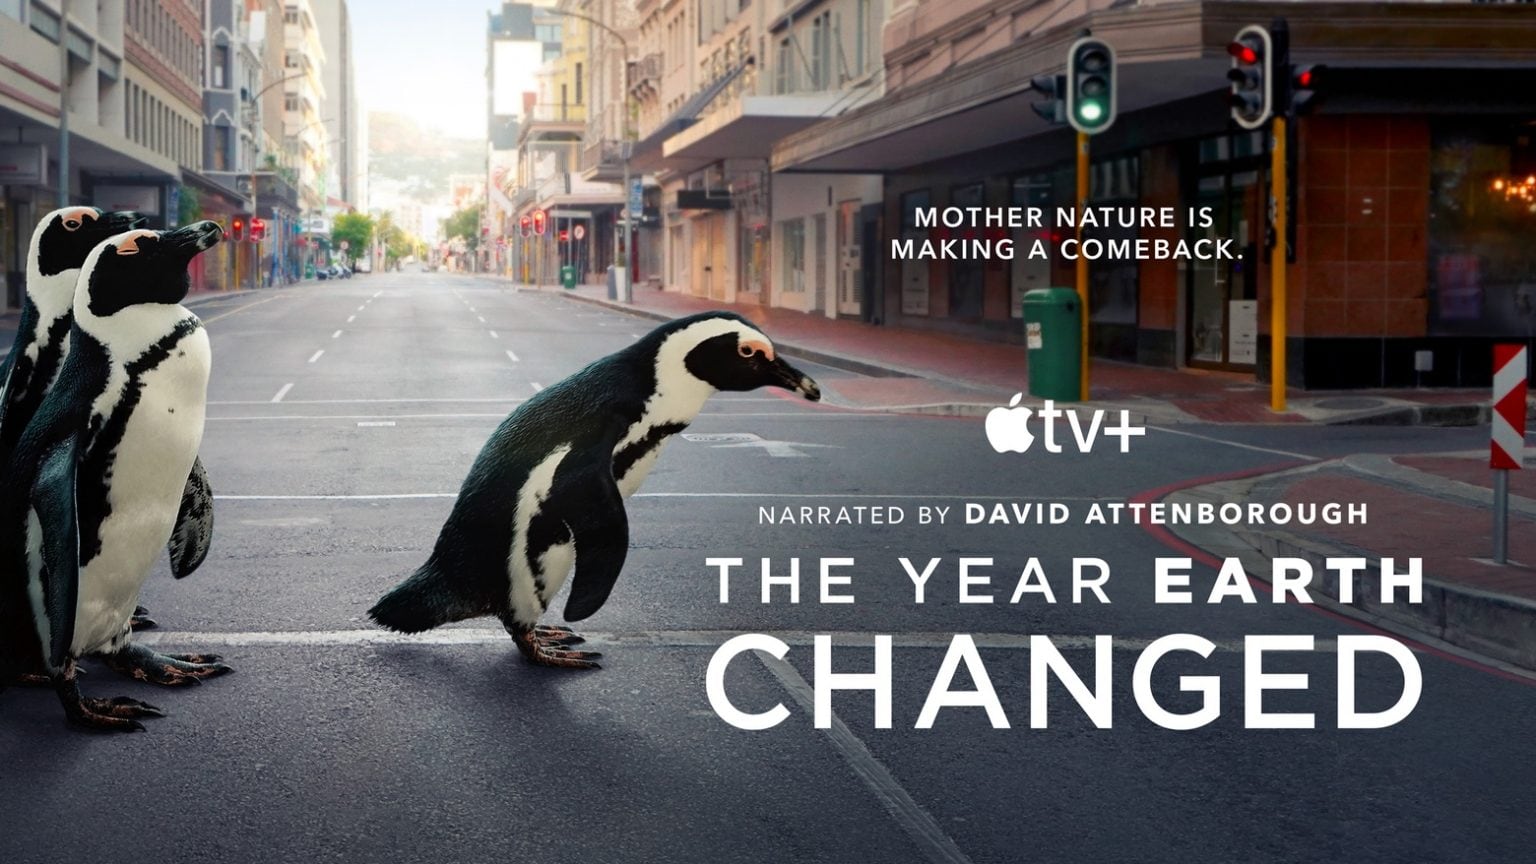 ‘ The Year Earth Changed’ premieres on Apple TV+ on April 15, 2021.